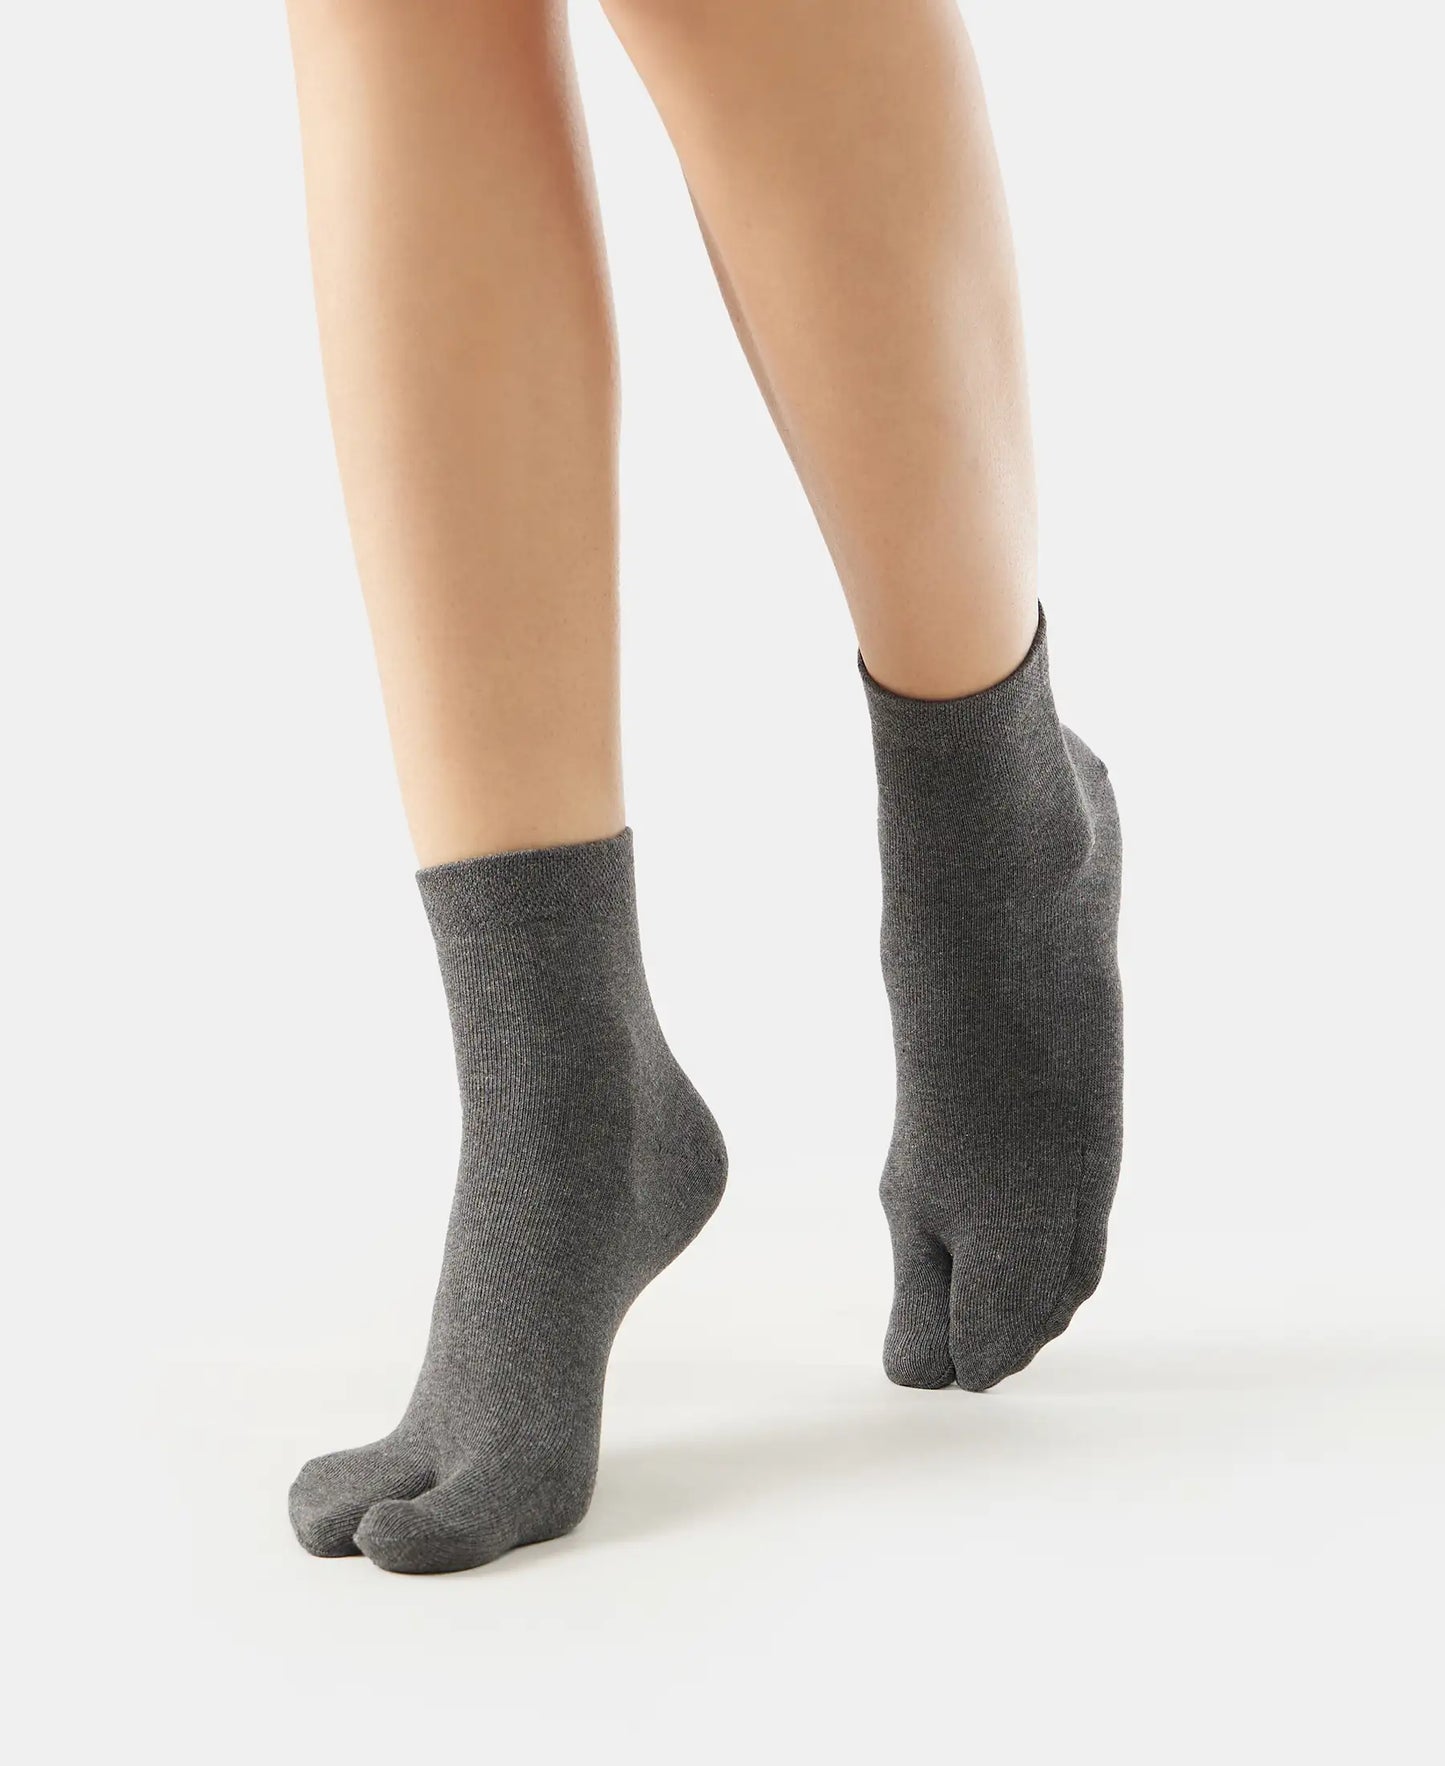 Compact Cotton Stretch Toe Socks with StayFresh Treatment - Charcoal Melange-4